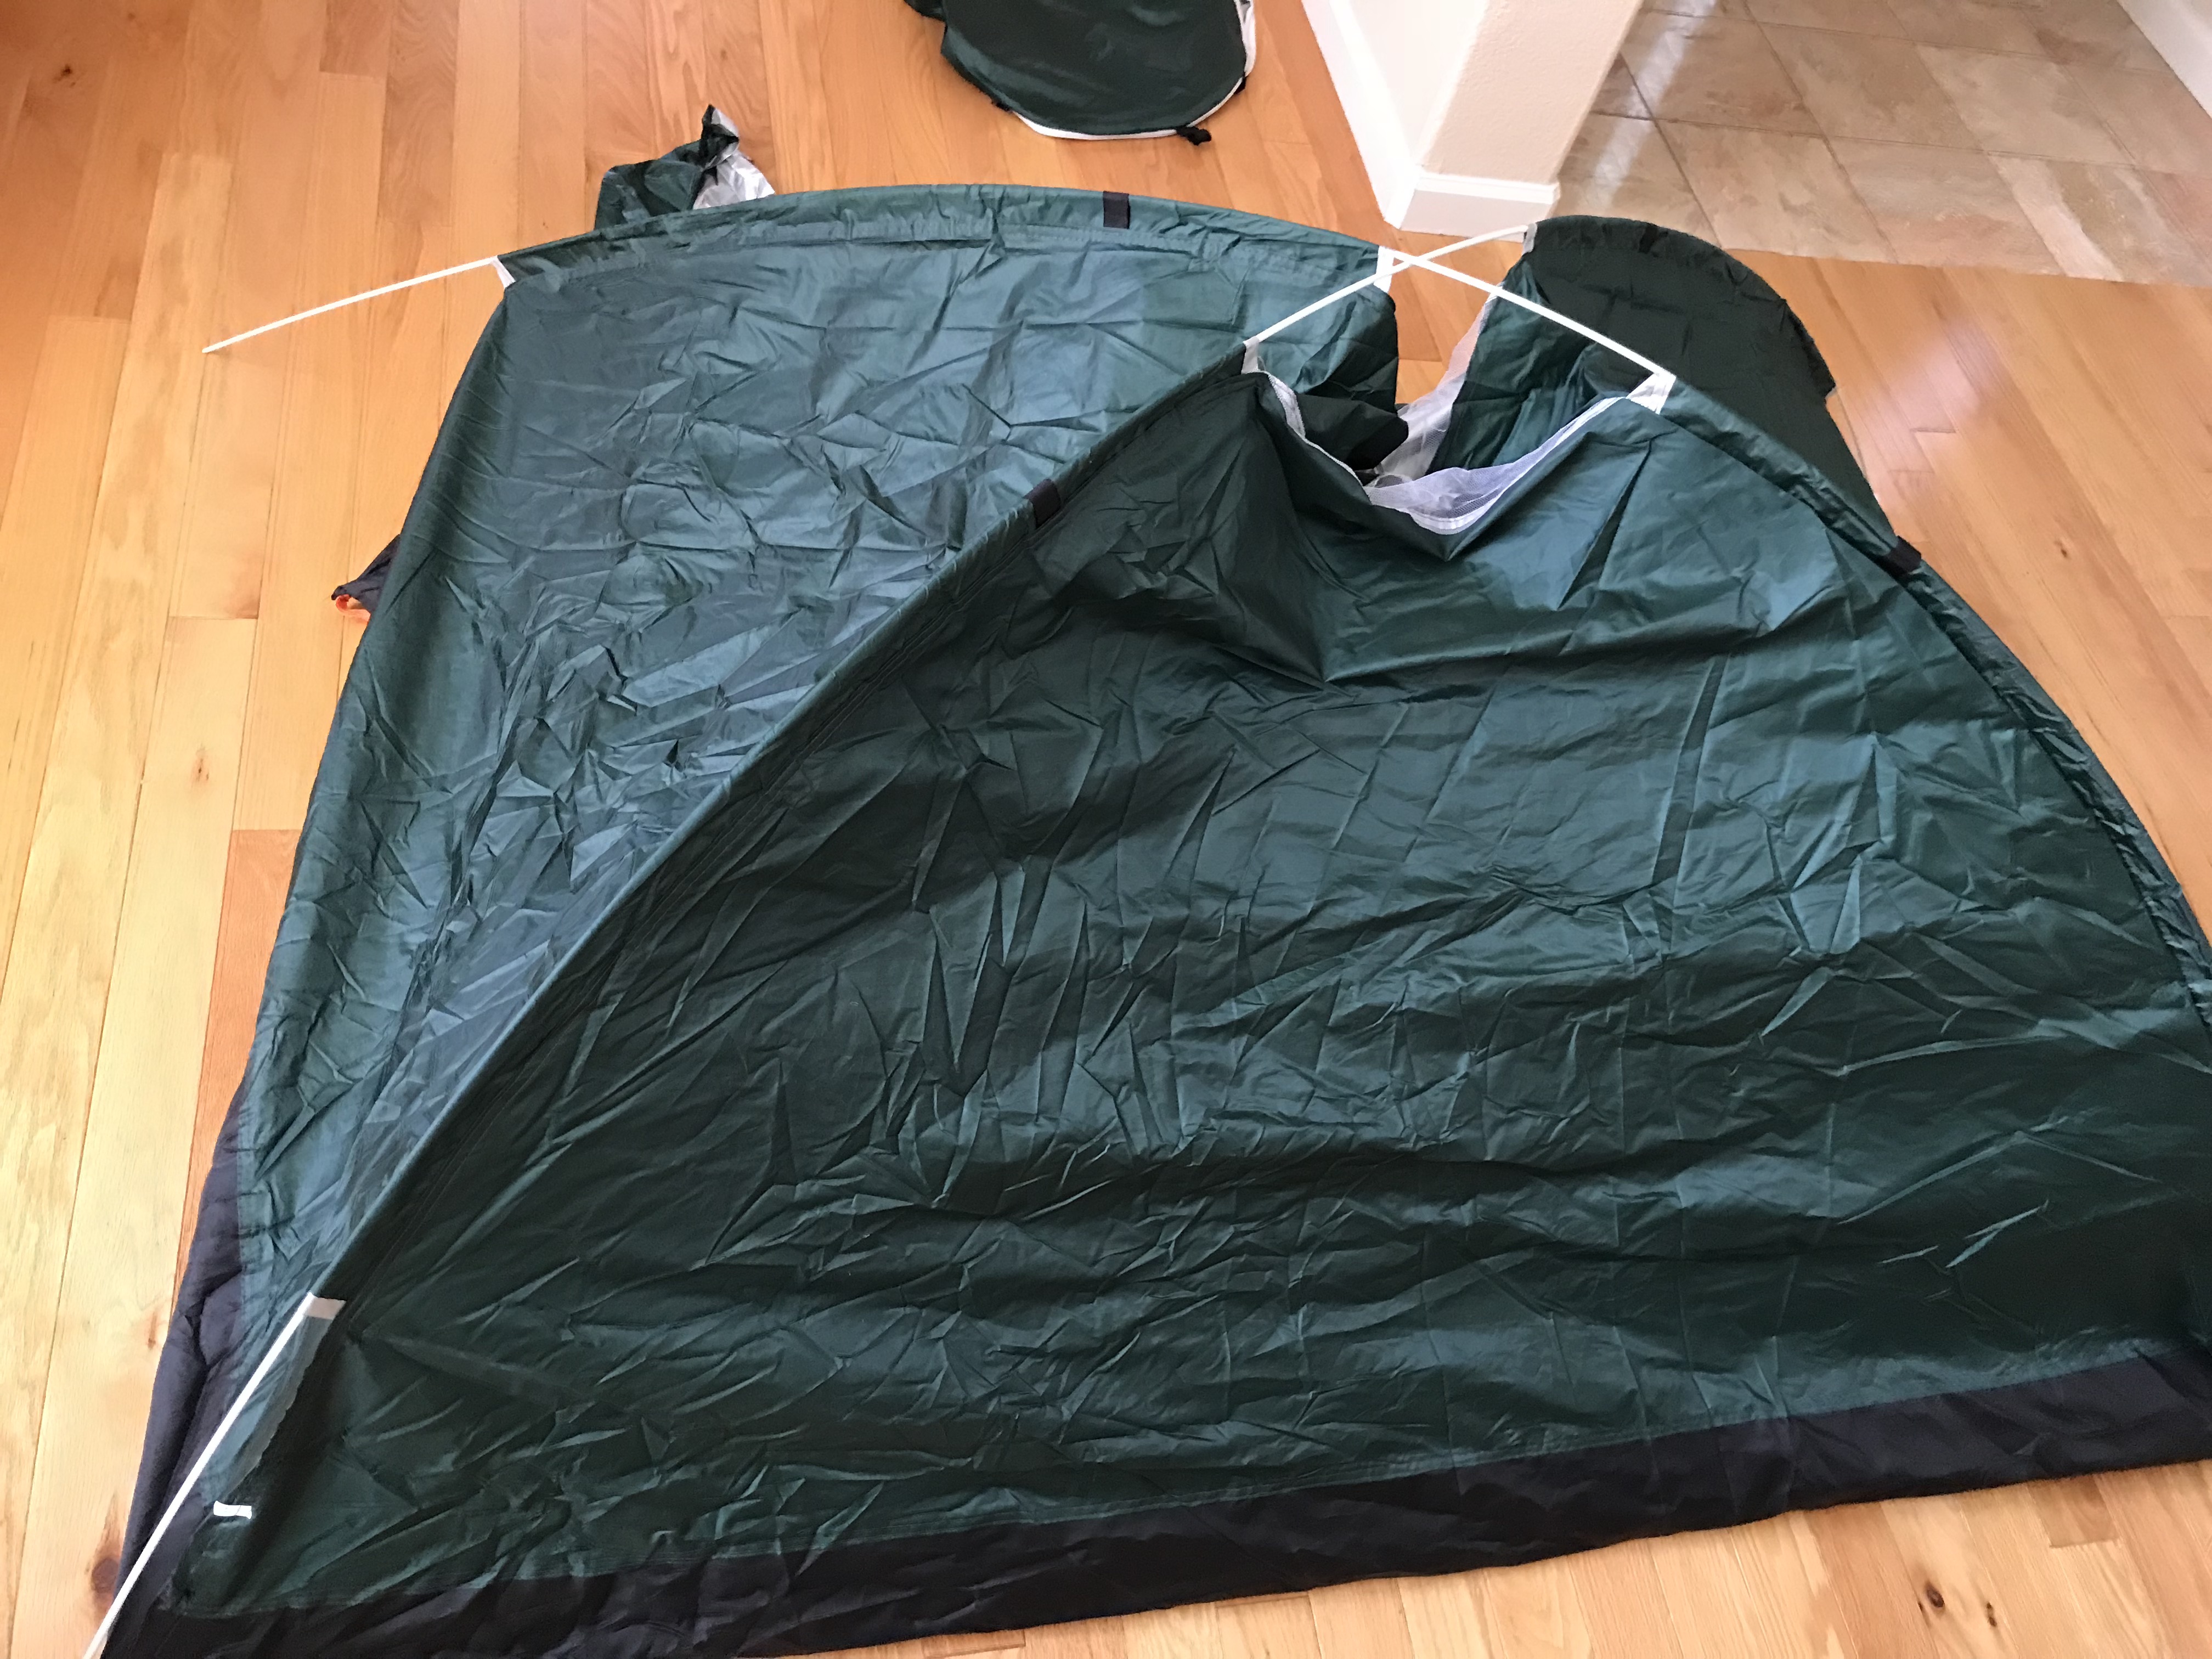 tent that was delivered to me: second picture